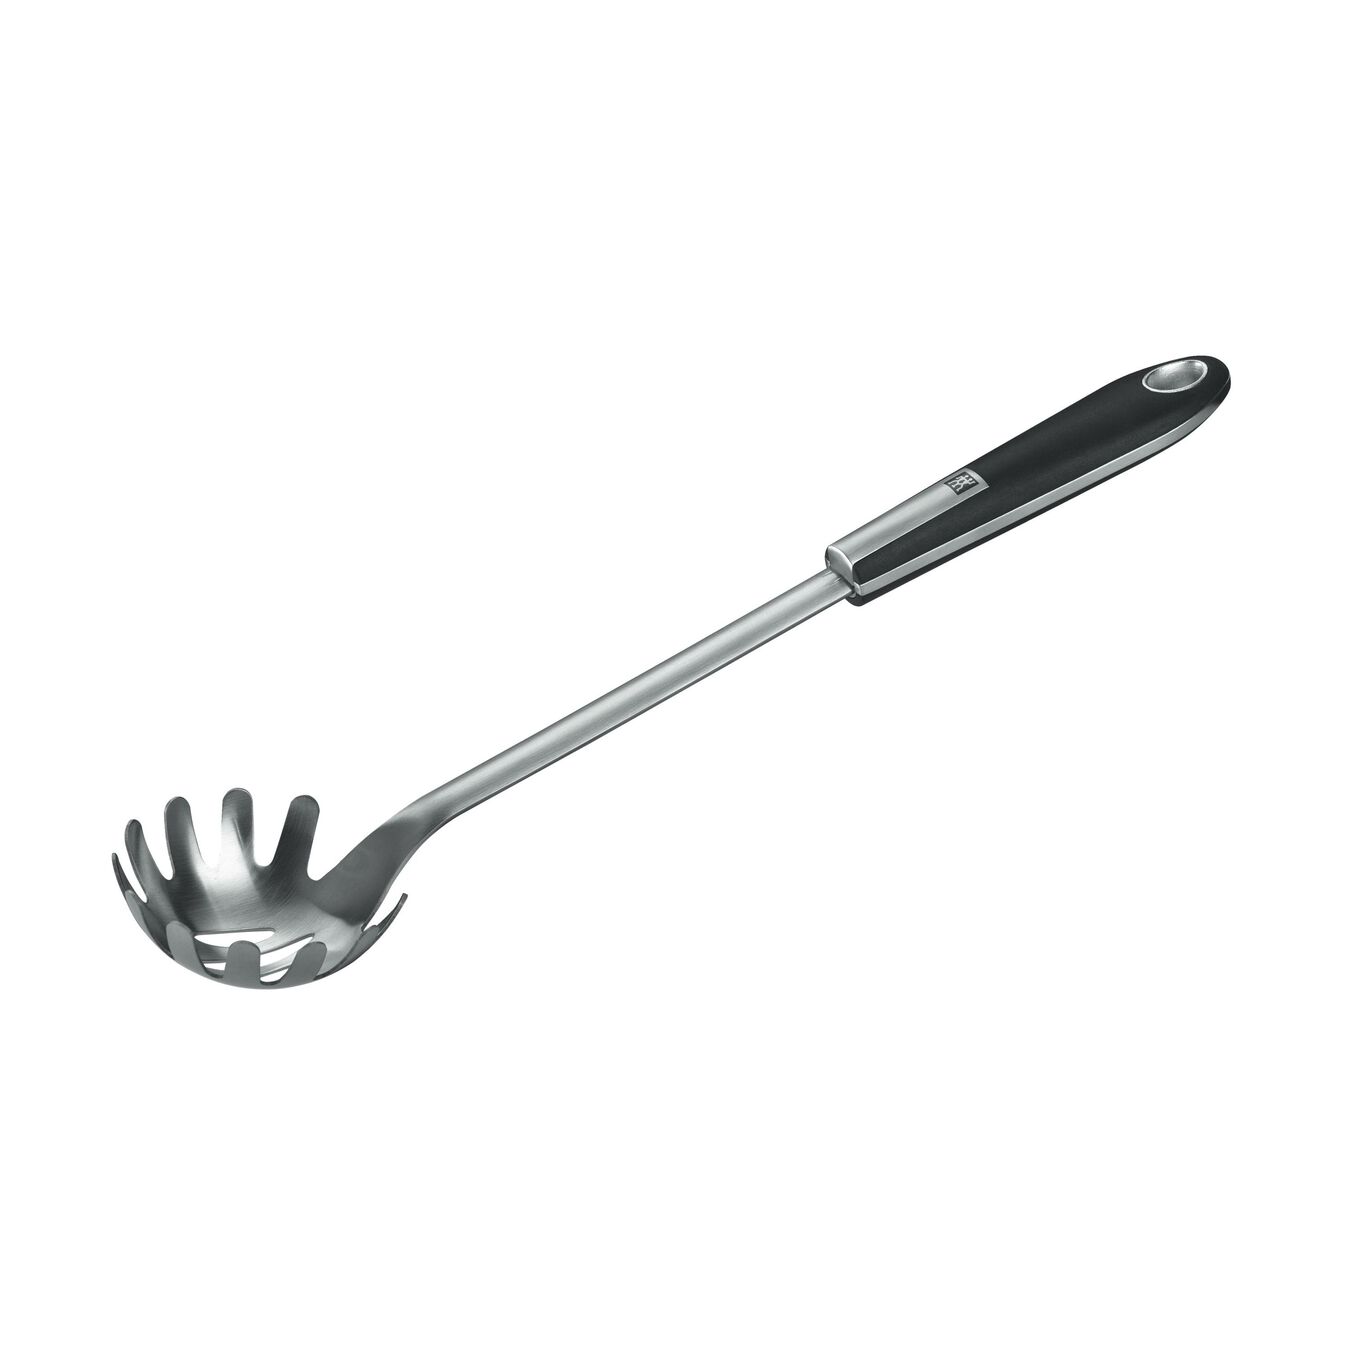 Pasta spoon 18/10 Stainless Steel,,large 1